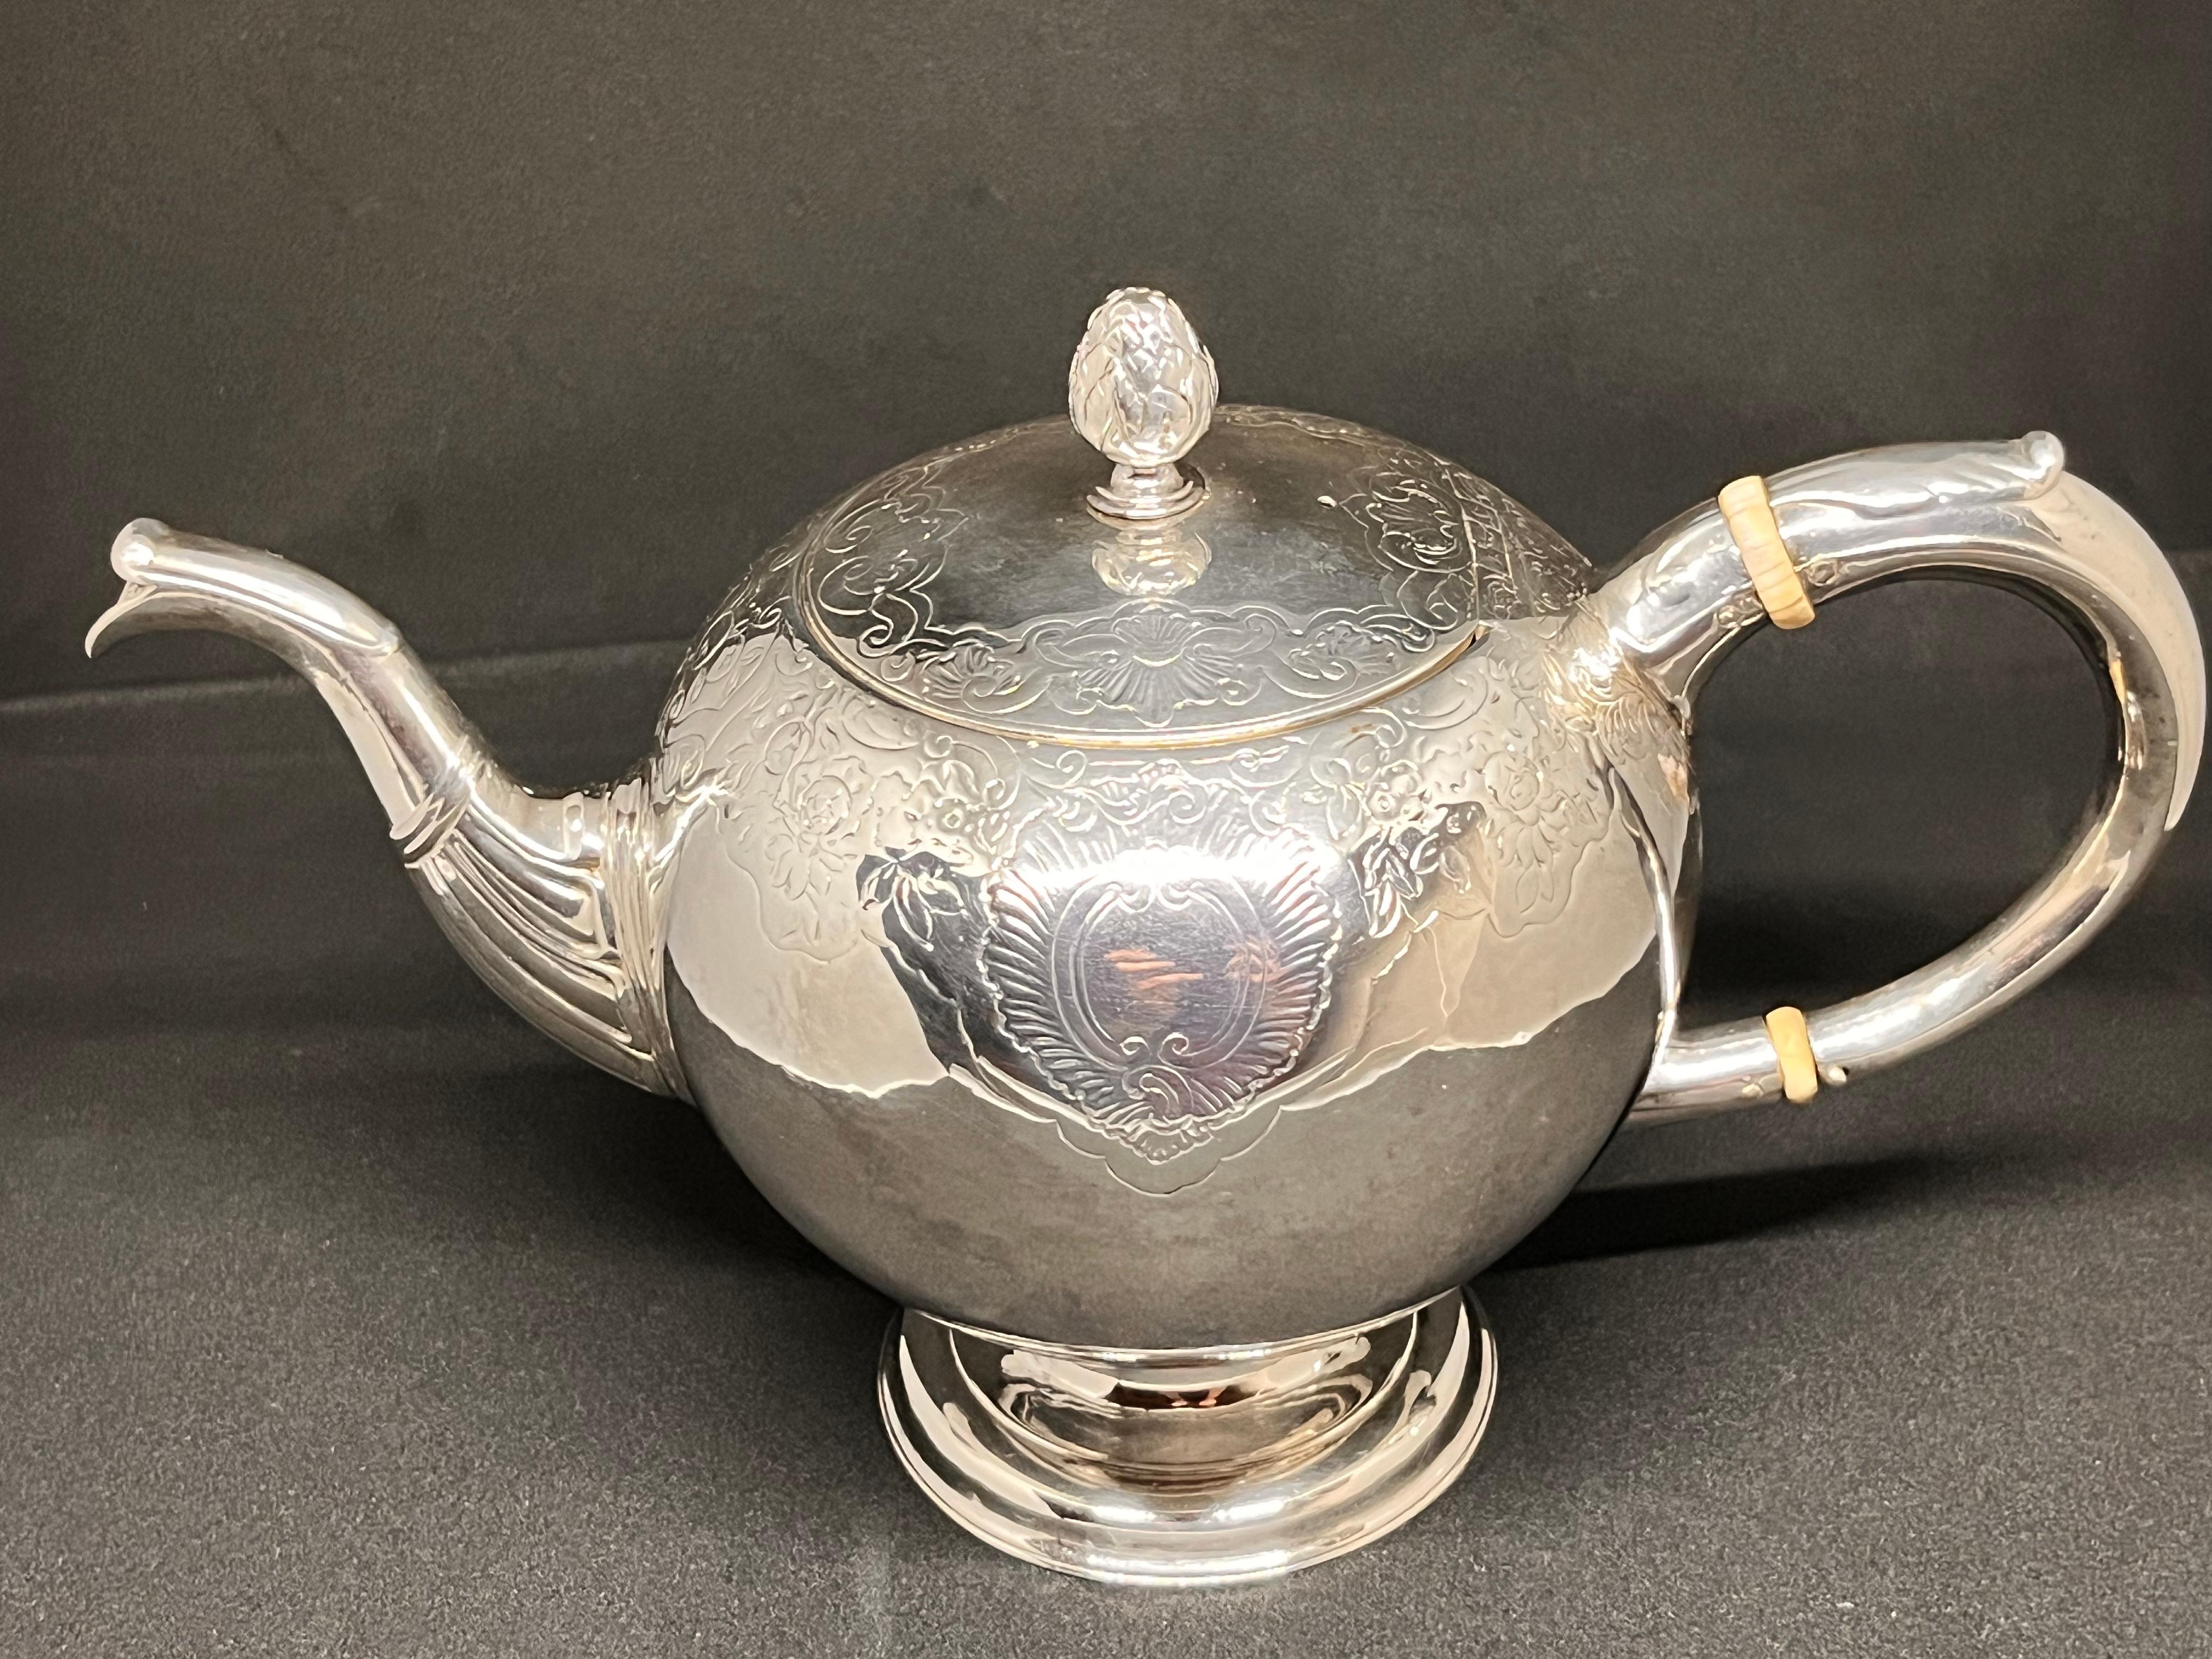 A splendid example of a George II Scottish silver teapot, of bullet shape, the body decorated with period flat chasing depicting fruit and flowers, with dual opposing vacant cartouche, atop a stepped, spreading circular foot, with short-form curved